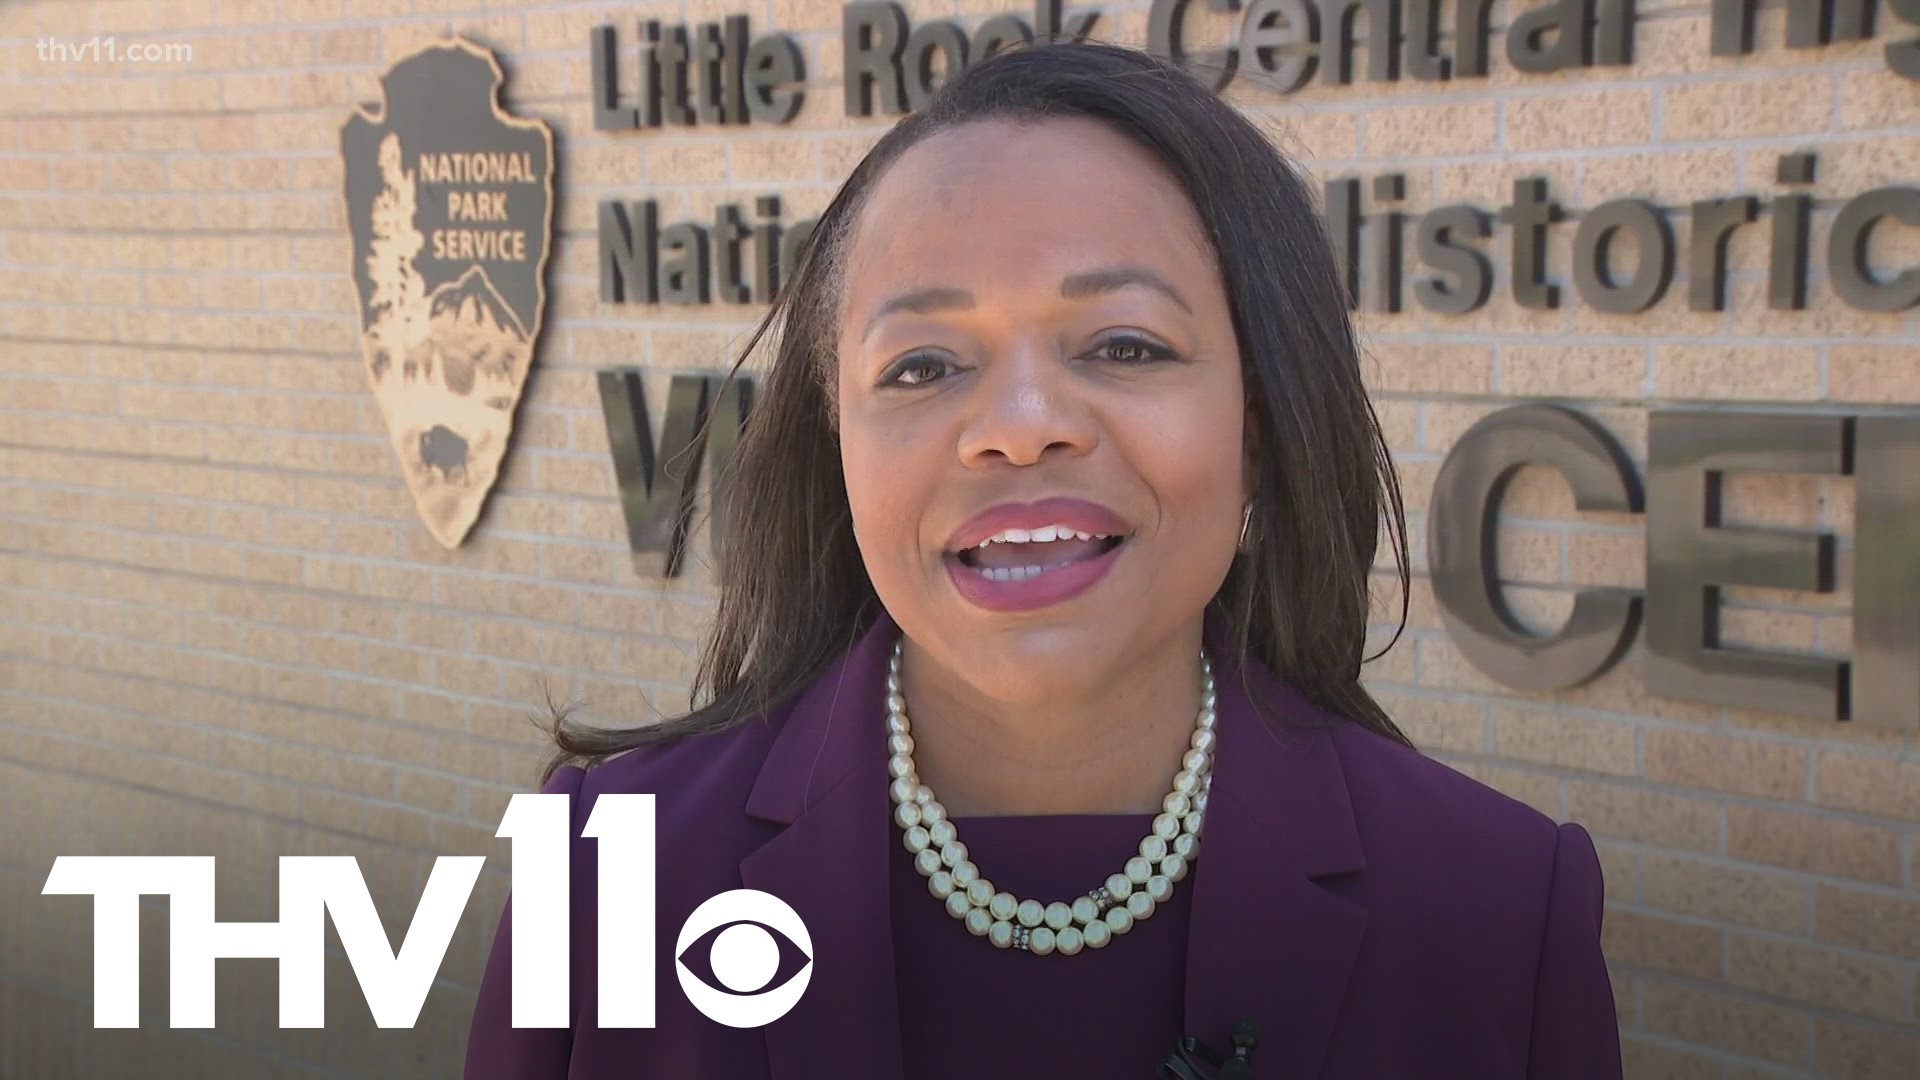 The Assistant Attorney General of the United States has been making her way across the country on a civil rights tour— and she stopped in Little Rock on Monday.